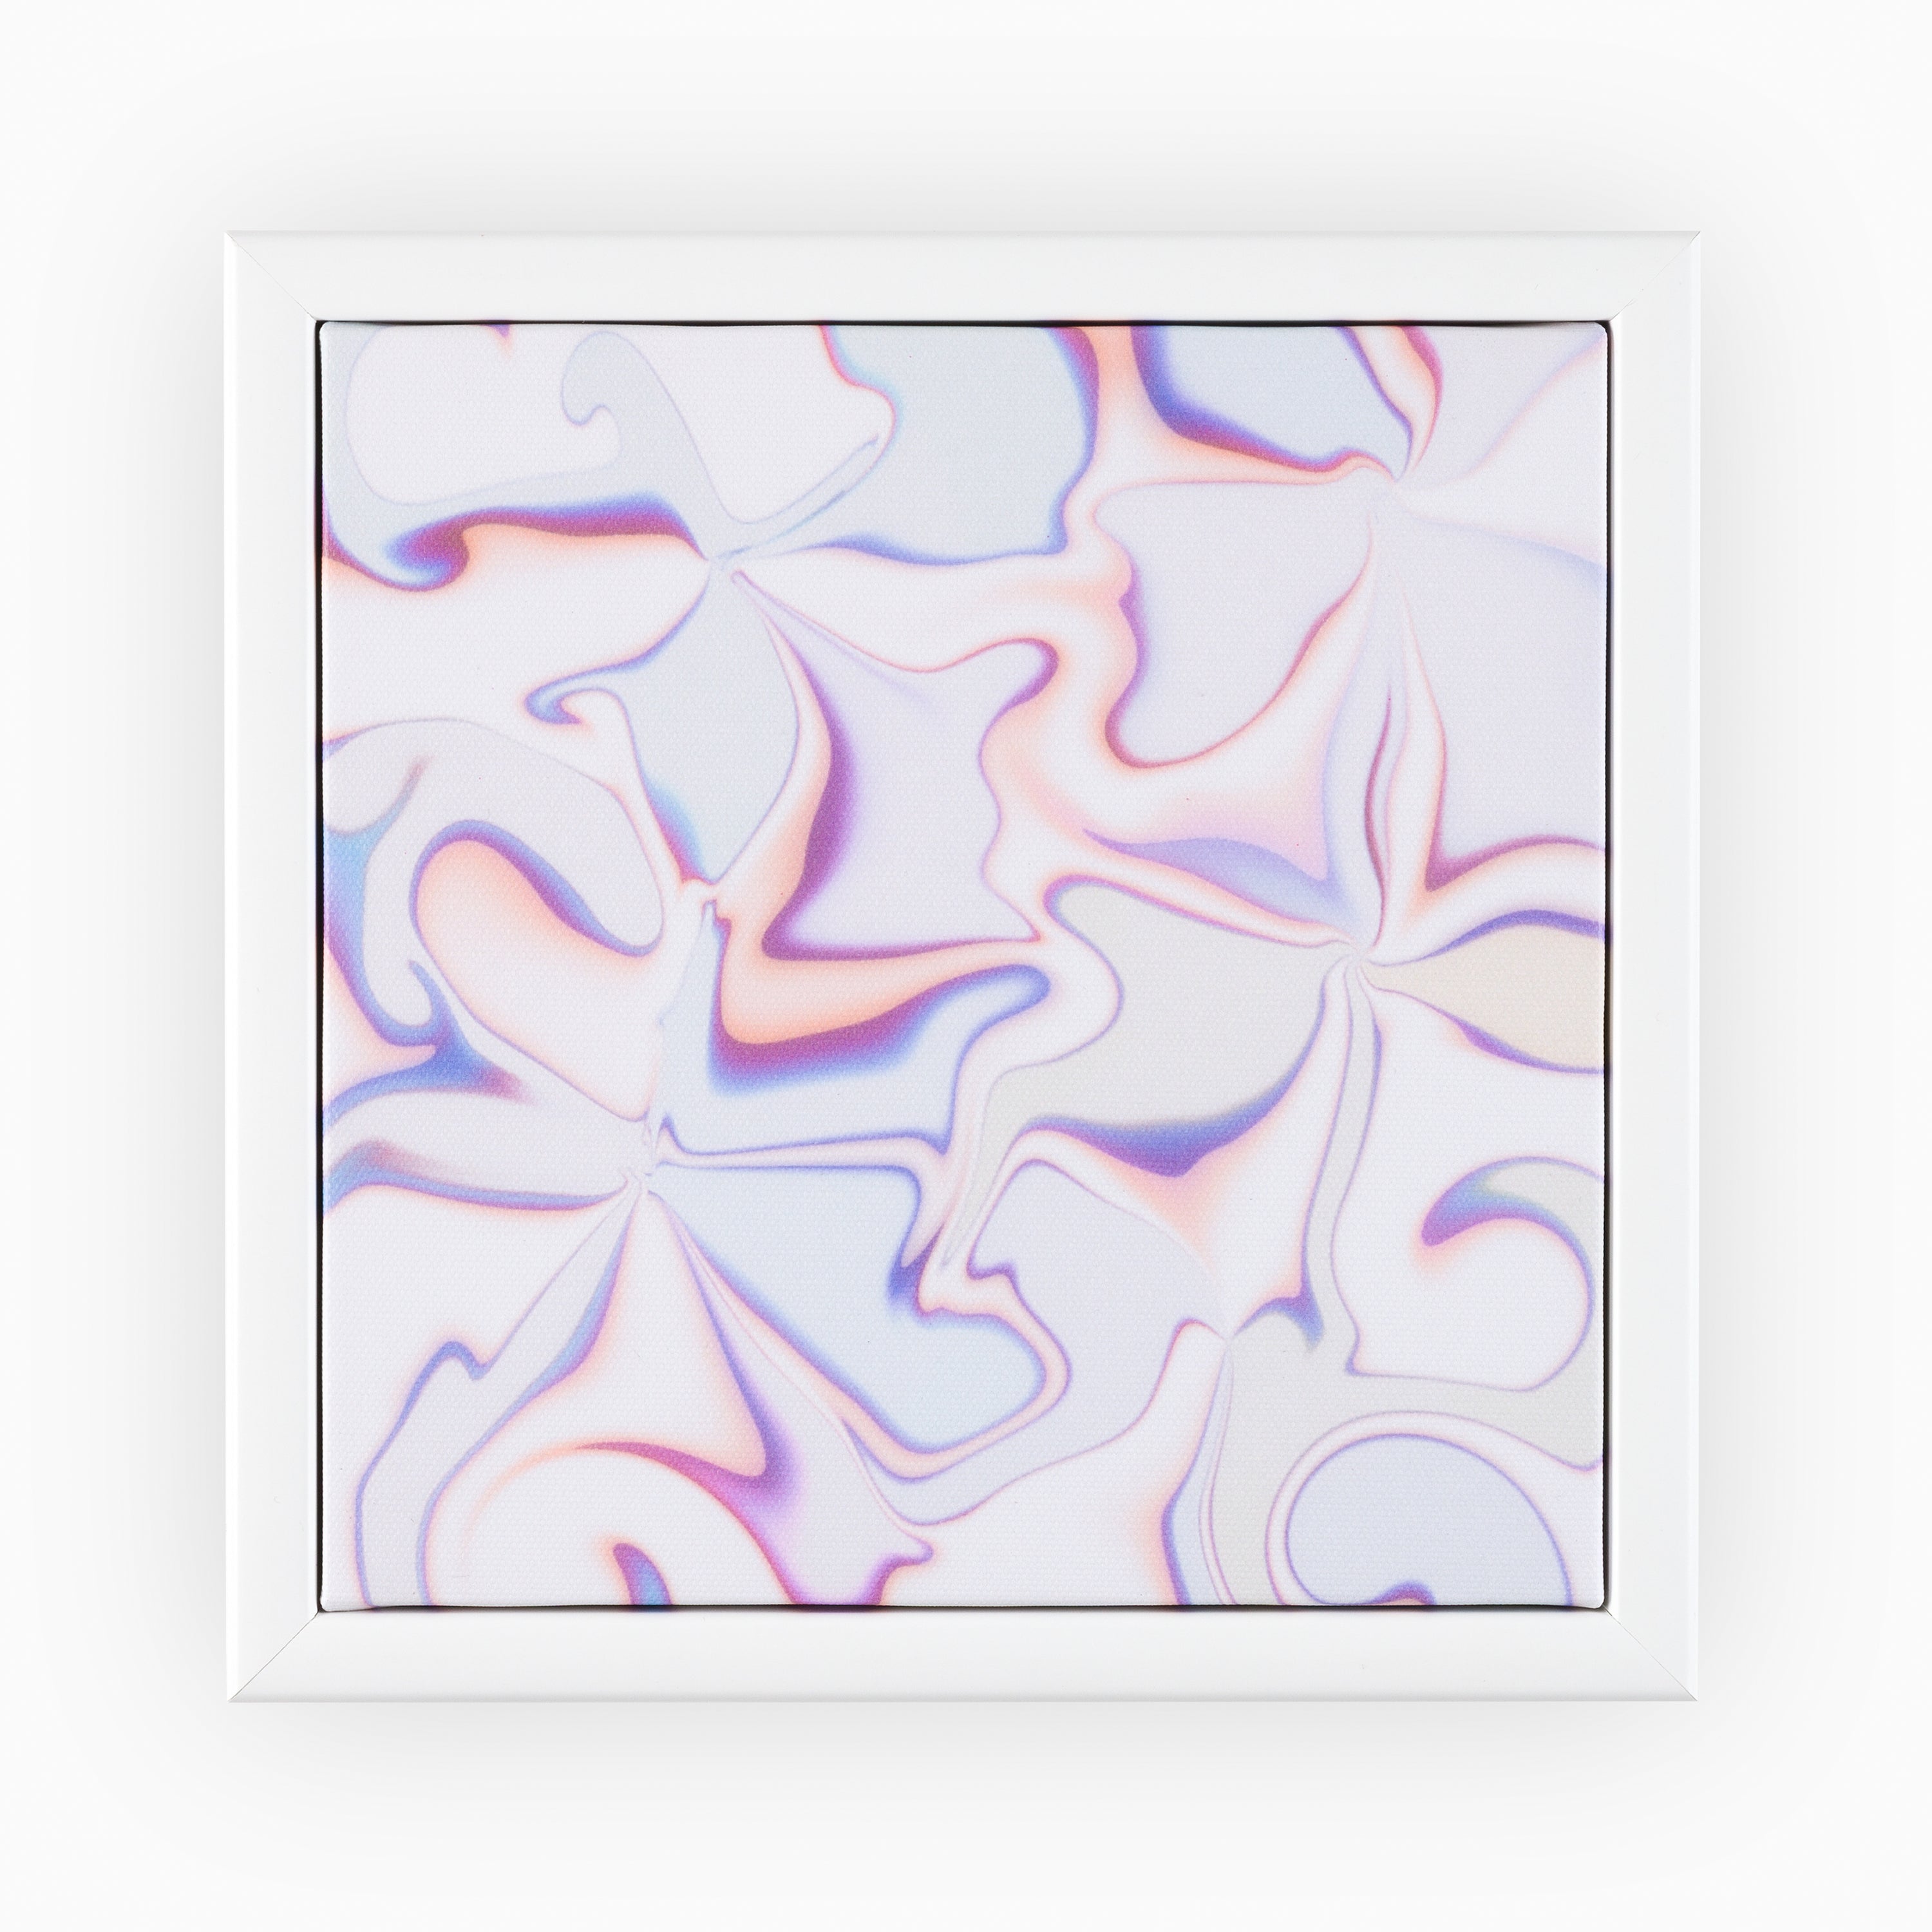 High-end canvas print within a white frame, capturing the fiery tips of jasmine blossoms through a digital abstract interpretation, complemented by a subtle pastel palette for a chic decor statement.